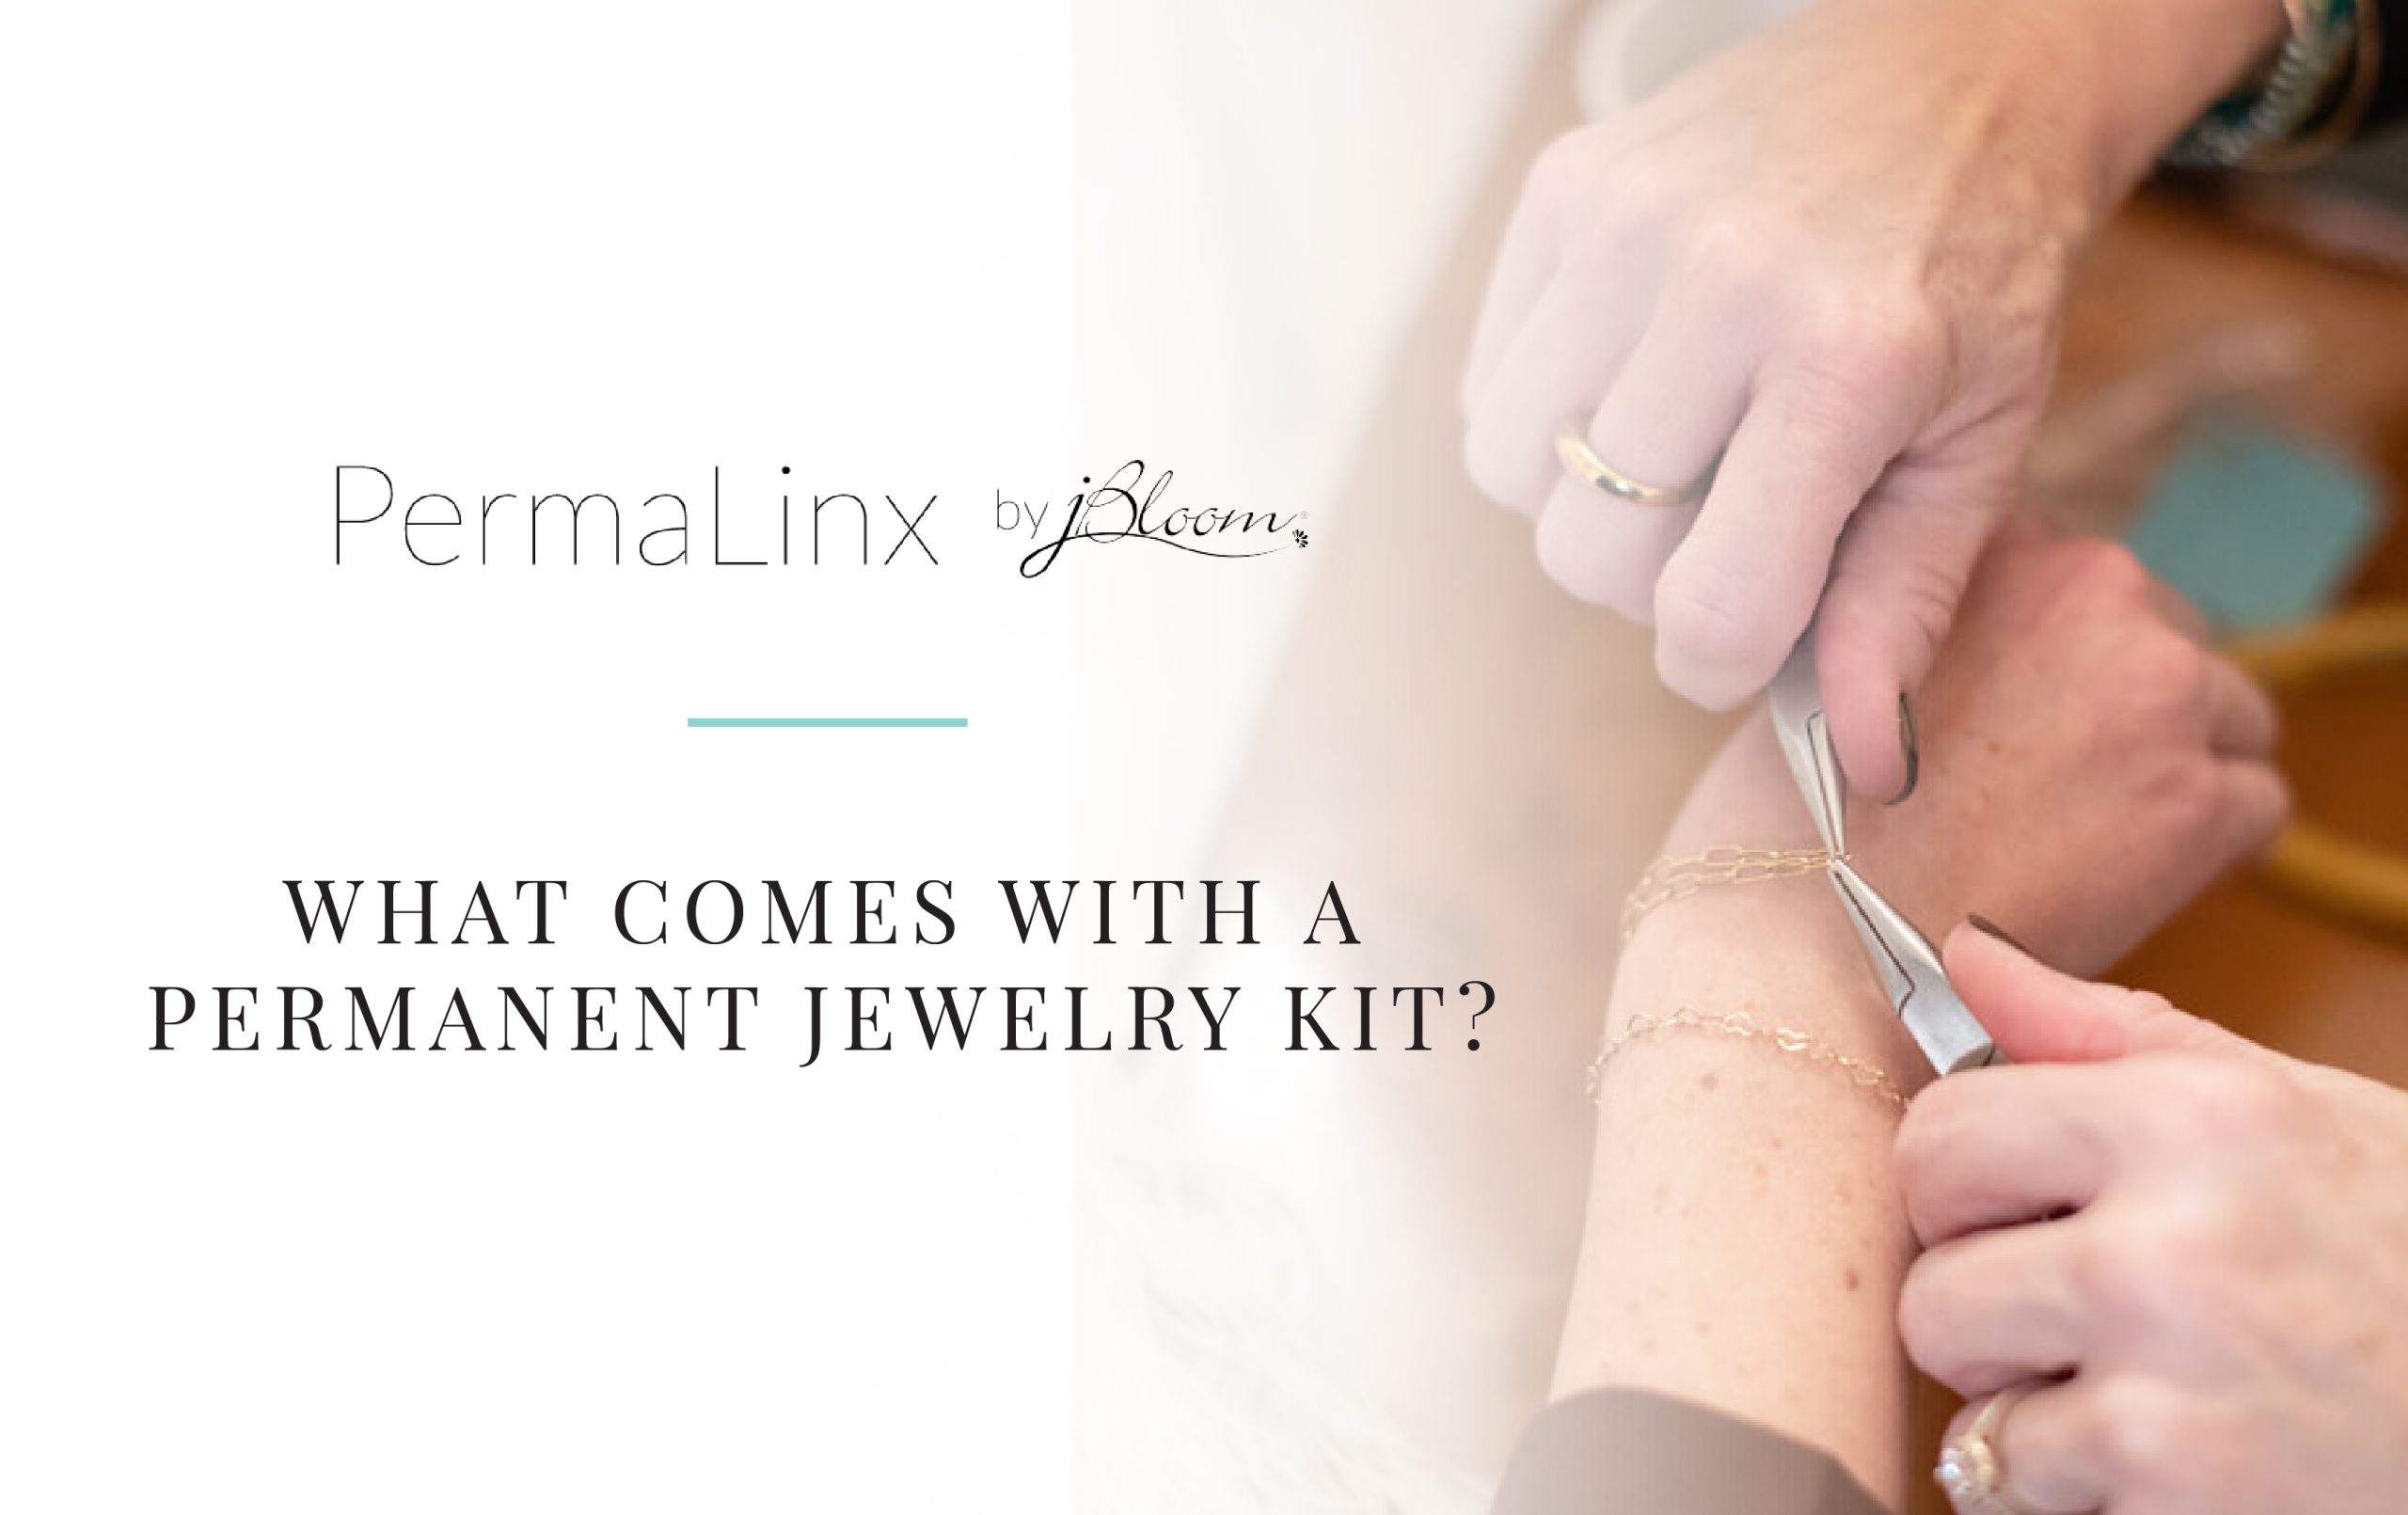 What Comes with a Permanent Jewelry Kit?